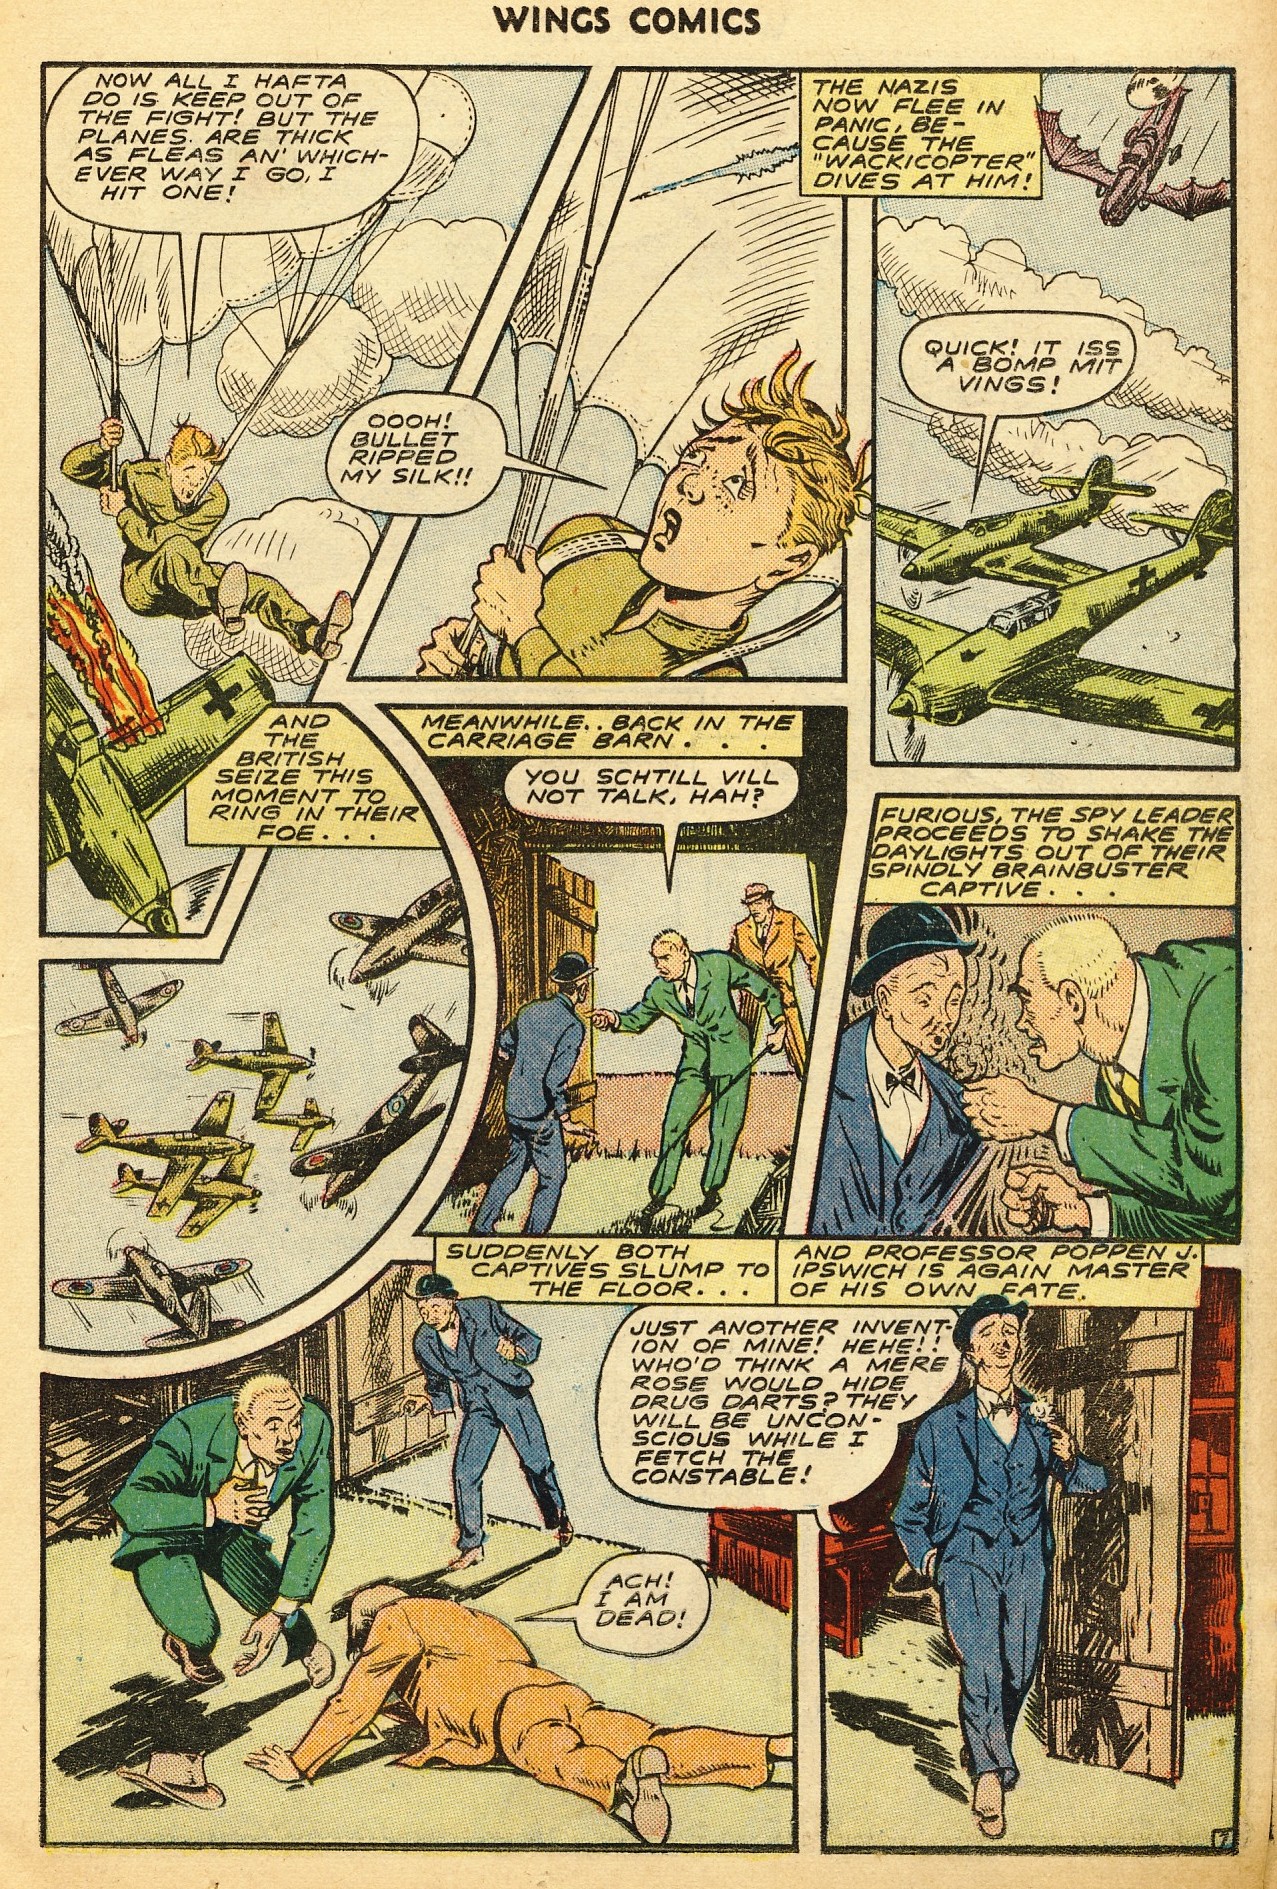 Read online Wings Comics comic -  Issue #45 - 19